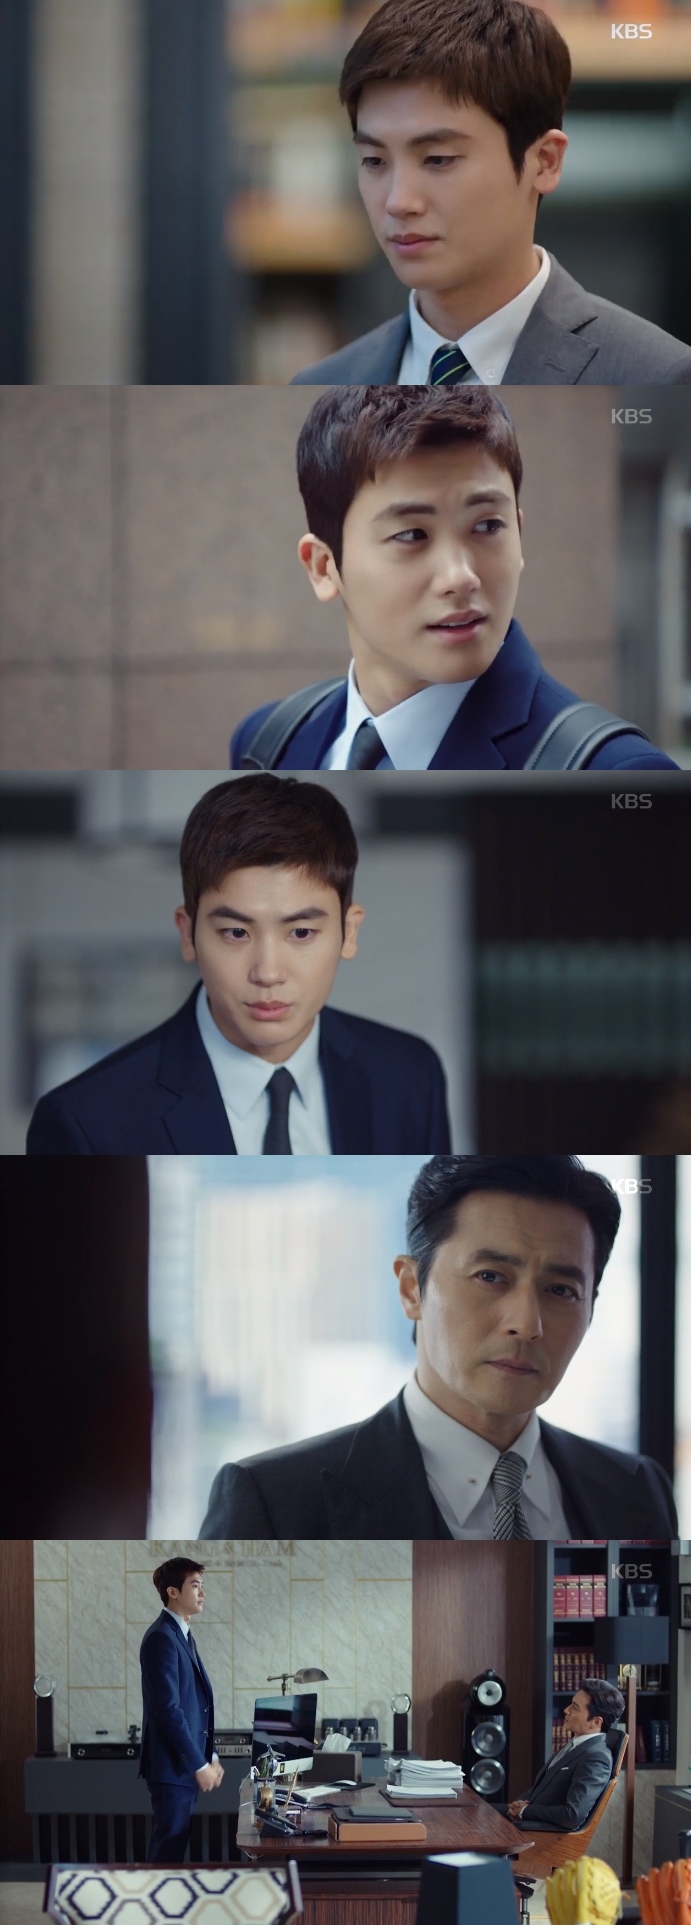 Suits Park Hyung-sik is making his identity as a lawyerIn the KBS 2TV drama Suits, which was broadcast on the 16th, Ko Yeon-woo (Park Hyung-sik) showed his growth facing the forgery of education and the past events of Miniforce Seok (Jang Dong-gun).Ko Yeon-woo entered Gang & Ham based on his genius memory, but he is not a real lawyer.I have been dreaming of a lawyer, but because of the circumstances, I started as an assistant to Miniforce, the representative lawyer of Gang & HamAt Moot Court, Ko Yeon-woo lost while trying to protect Ji-na Kim (Ko Sung-hee).Miniforce expressed disappointment to him, but Ko said he wanted to be a lawyer who could at least protect the person who is near even if he dies.In addition, Chae Keun-sik (Choi Gwi-hwa) suspected him of digging into the case of forgery of education, which was similar to the current situation of Ko Yeon-woo.However, Ko Yeon-woo responded to Chae Geun-siks words with a clear response and showed a grandeur as a real lawyer.Ko Yeon-woo, a growing baby lawyer and fake lawyer next to a Miniforce seat, has now grown to make a direct statement to Miniforce.When Miniforce was shaken by his feelings with his former senior prosecutor, Oh (Jeonnomin), he said, I do not know why you are trying to protect the guilty misjudgment.If the lawyer is not shaken by the emotion, should not you pick up the knife that you put in the sheath? This means that Ko Yeon-woo is influenced by the Miniforce stone as it is, which has been given the advice of the Miniforce stone to Ko Yeon-woo, who was slowed down due to his feelings with Ji-na Kim in the Moot court.Ko Yeon-woo, who is growing up as a lawyer, is also growing love in his strange relationship with Ji-na Kim, after a mock court, Ji-na Kim told Ko Yeon-woo, The lawyer cares.In addition, Ko Yeon-woo and Ji-na Kim were looking for data related to the Miniforce stone, and they caught the mouse at the same time and showed skinship.It was a short moment, but Chemie, who came out between the two, was enough to thrill viewers.Ko Yeon-woo, who shows the growth of lawyer and man at the same time. The growth period of baby lawyer adds fun to the drama and gives pleasure.Photo = KBS 2TV broadcast screen